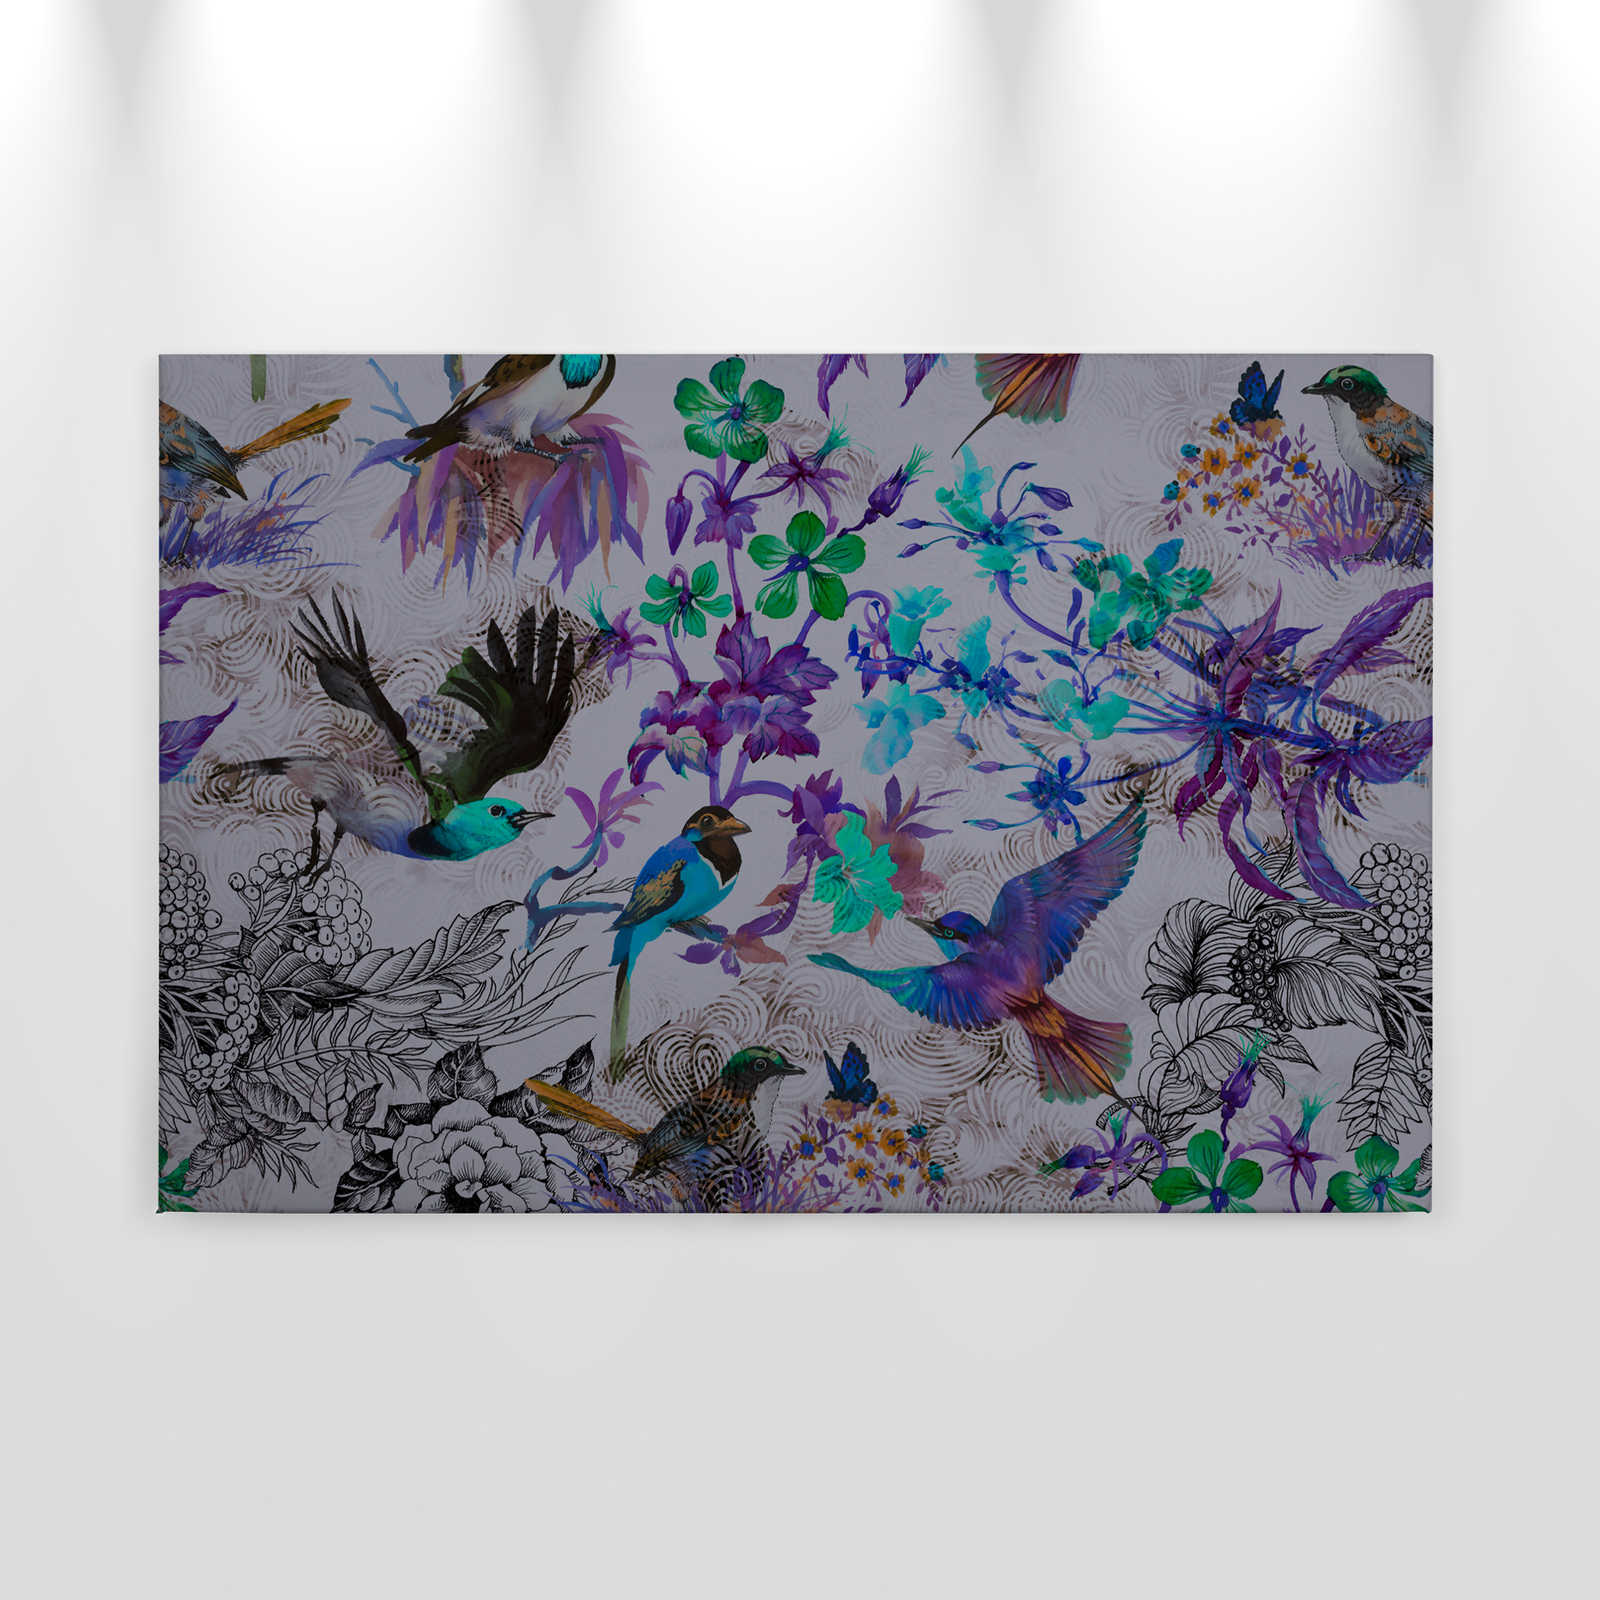             Purple Canvas Painting with Flowers & Birds - 0.90 m x 0.60 m
        